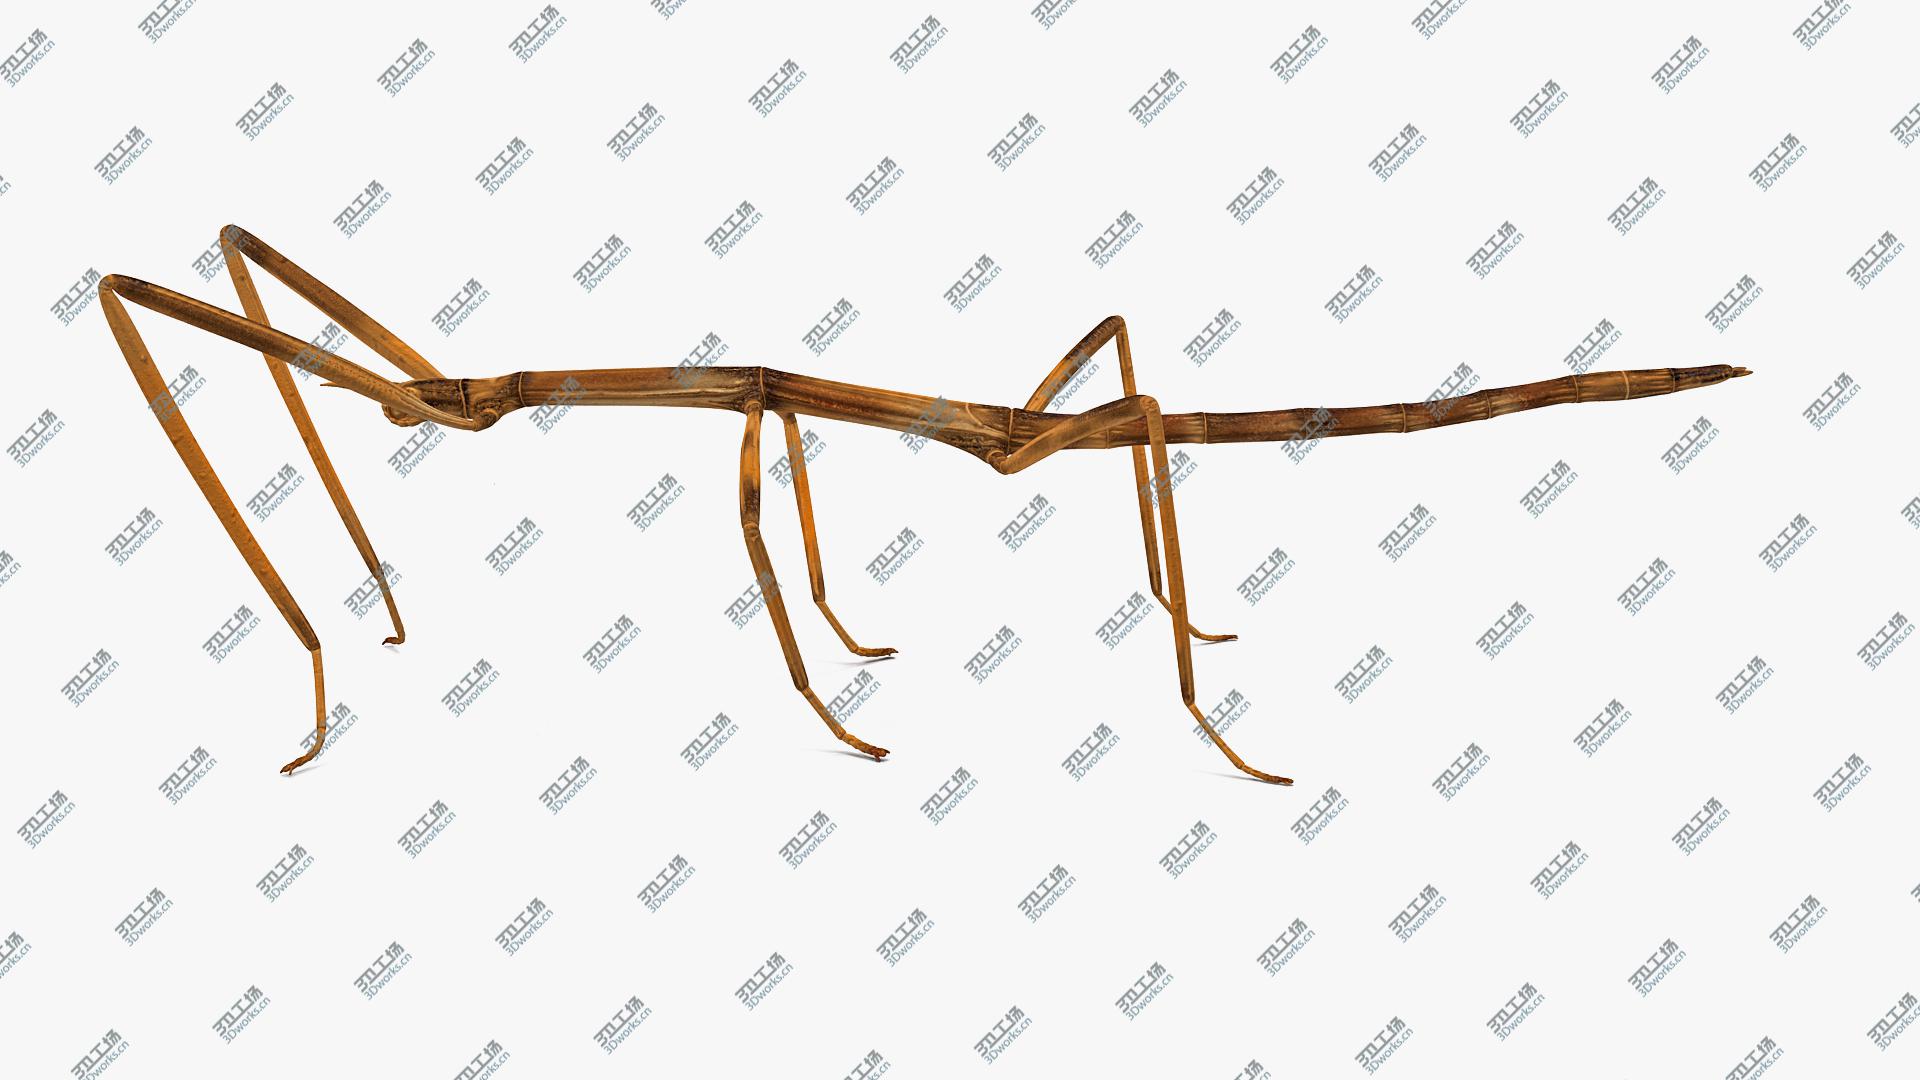 images/goods_img/2021040162/3D Stick Insect Brown Rigged model/3.jpg